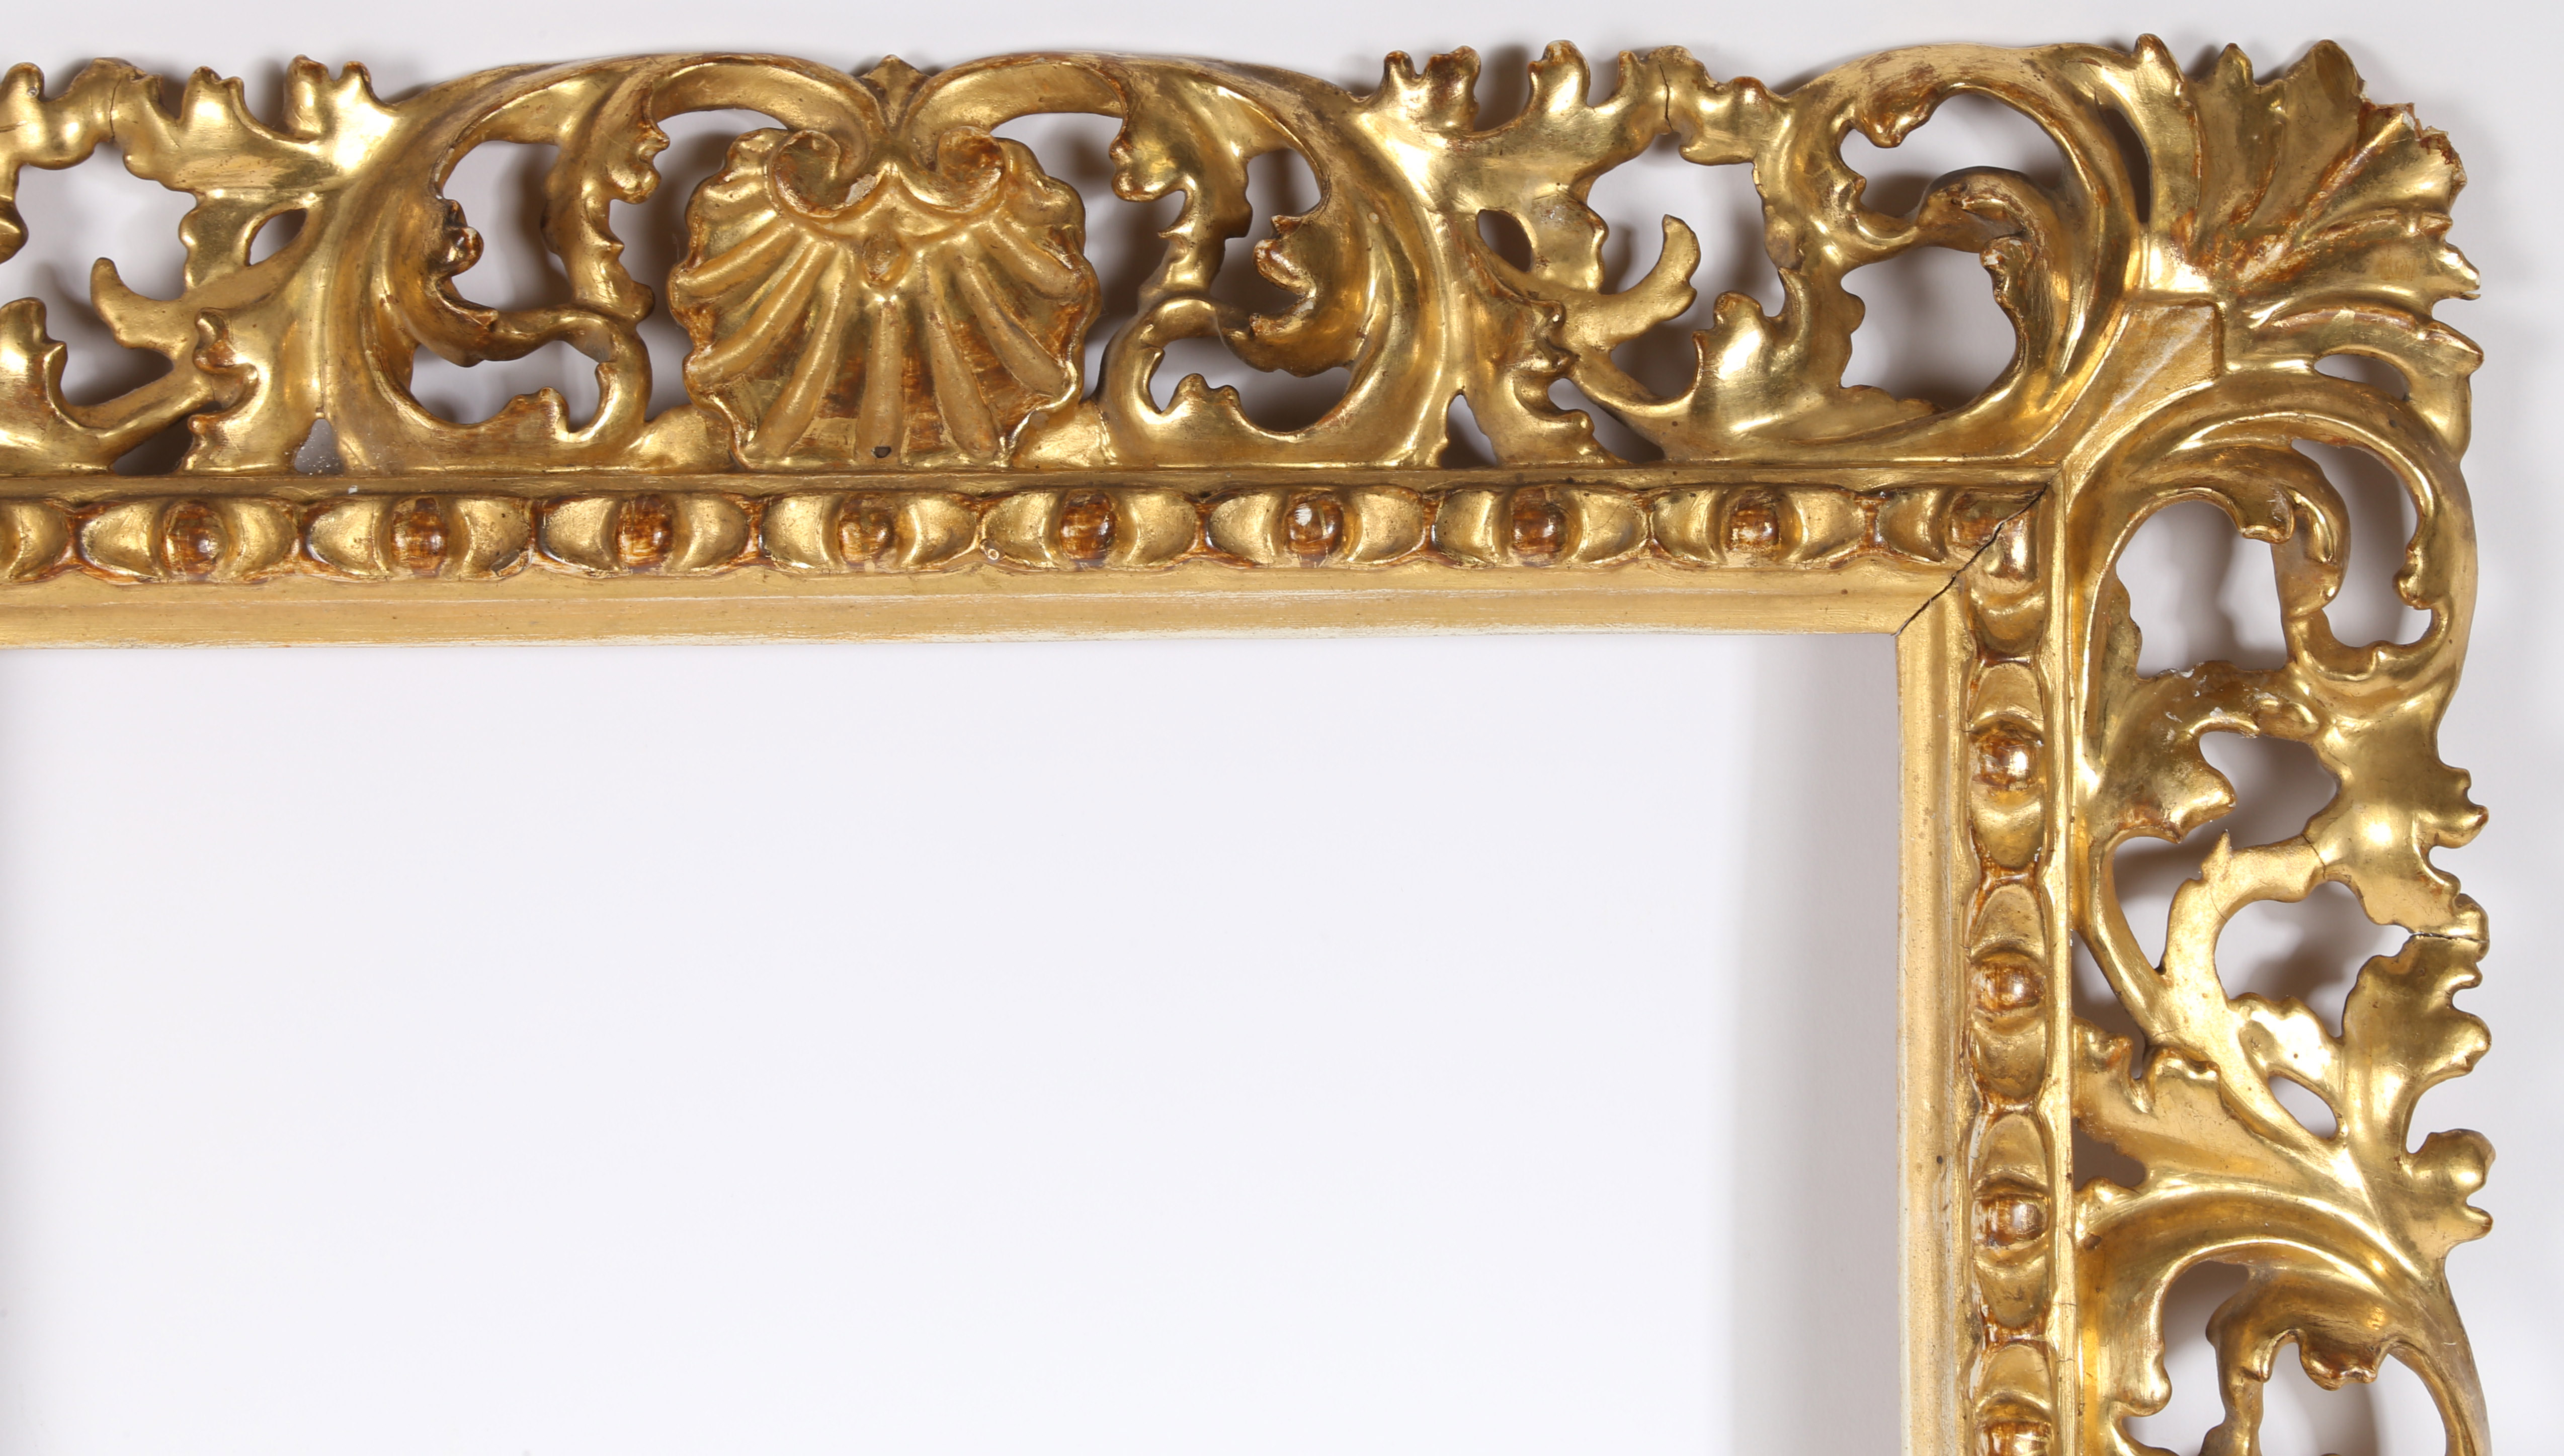 19th century carved Florentine picture frame -rebate size 19in x 13.5in